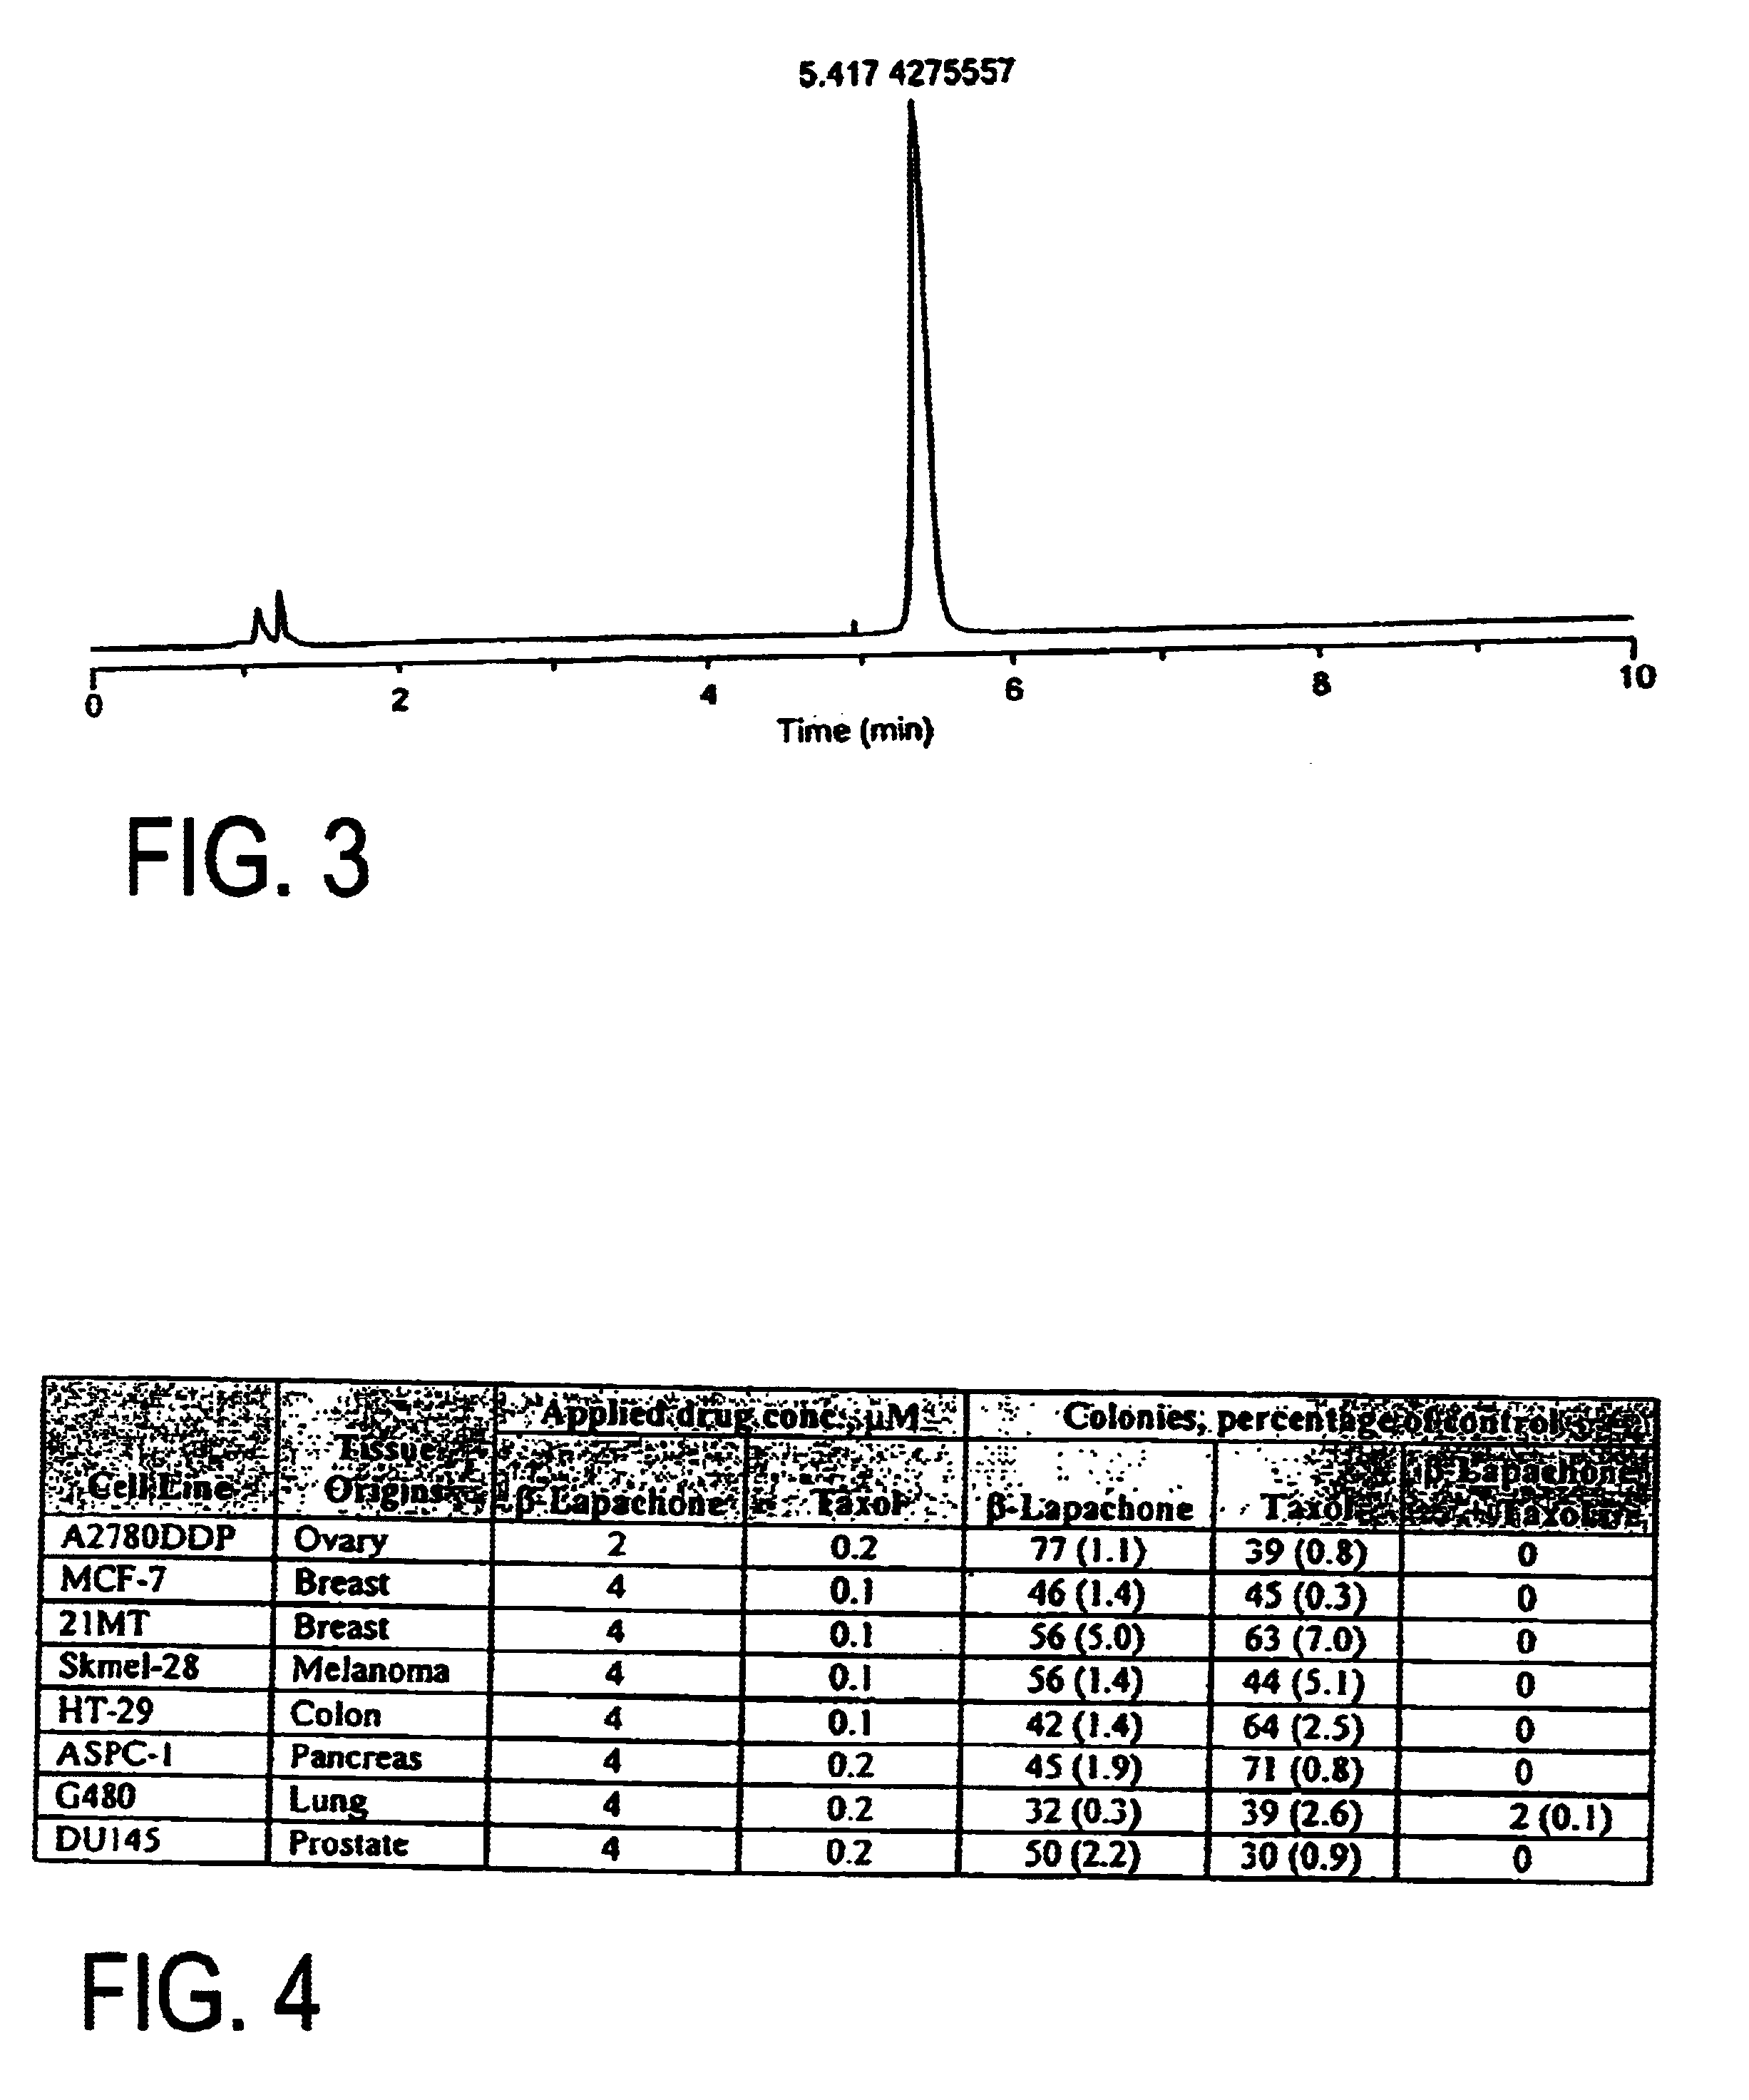 Pharmaceutical compositions containing beta-lapachone, or derivatives or analogs thereof, and methods of using same